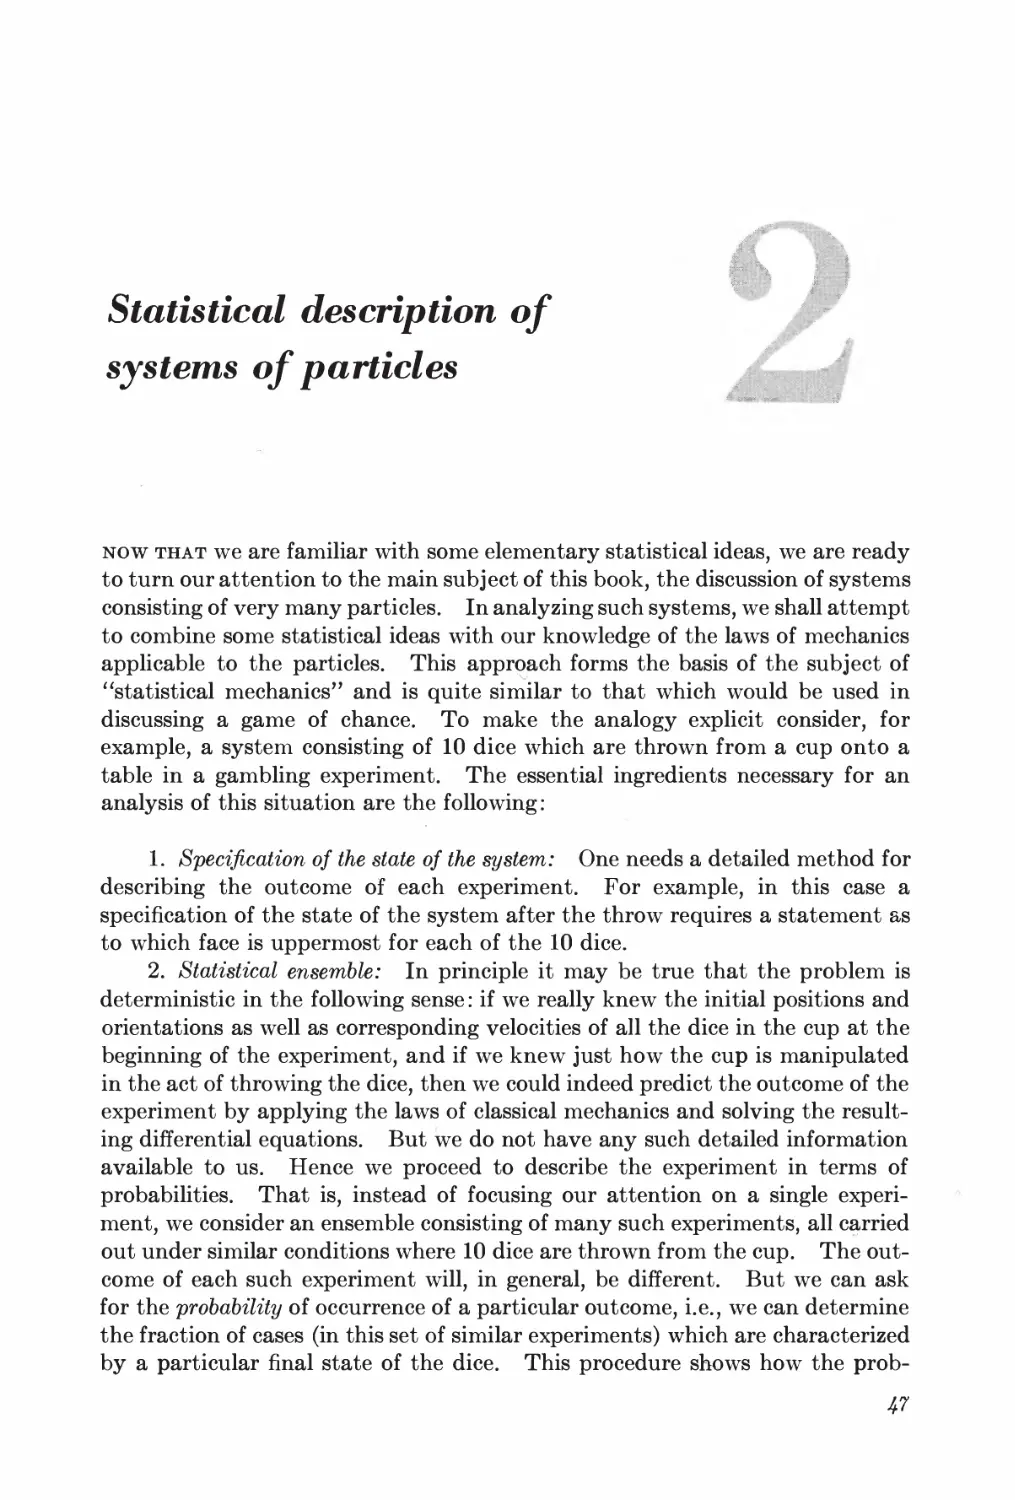 Chapter 2: Statistical Description of Systems of Particles